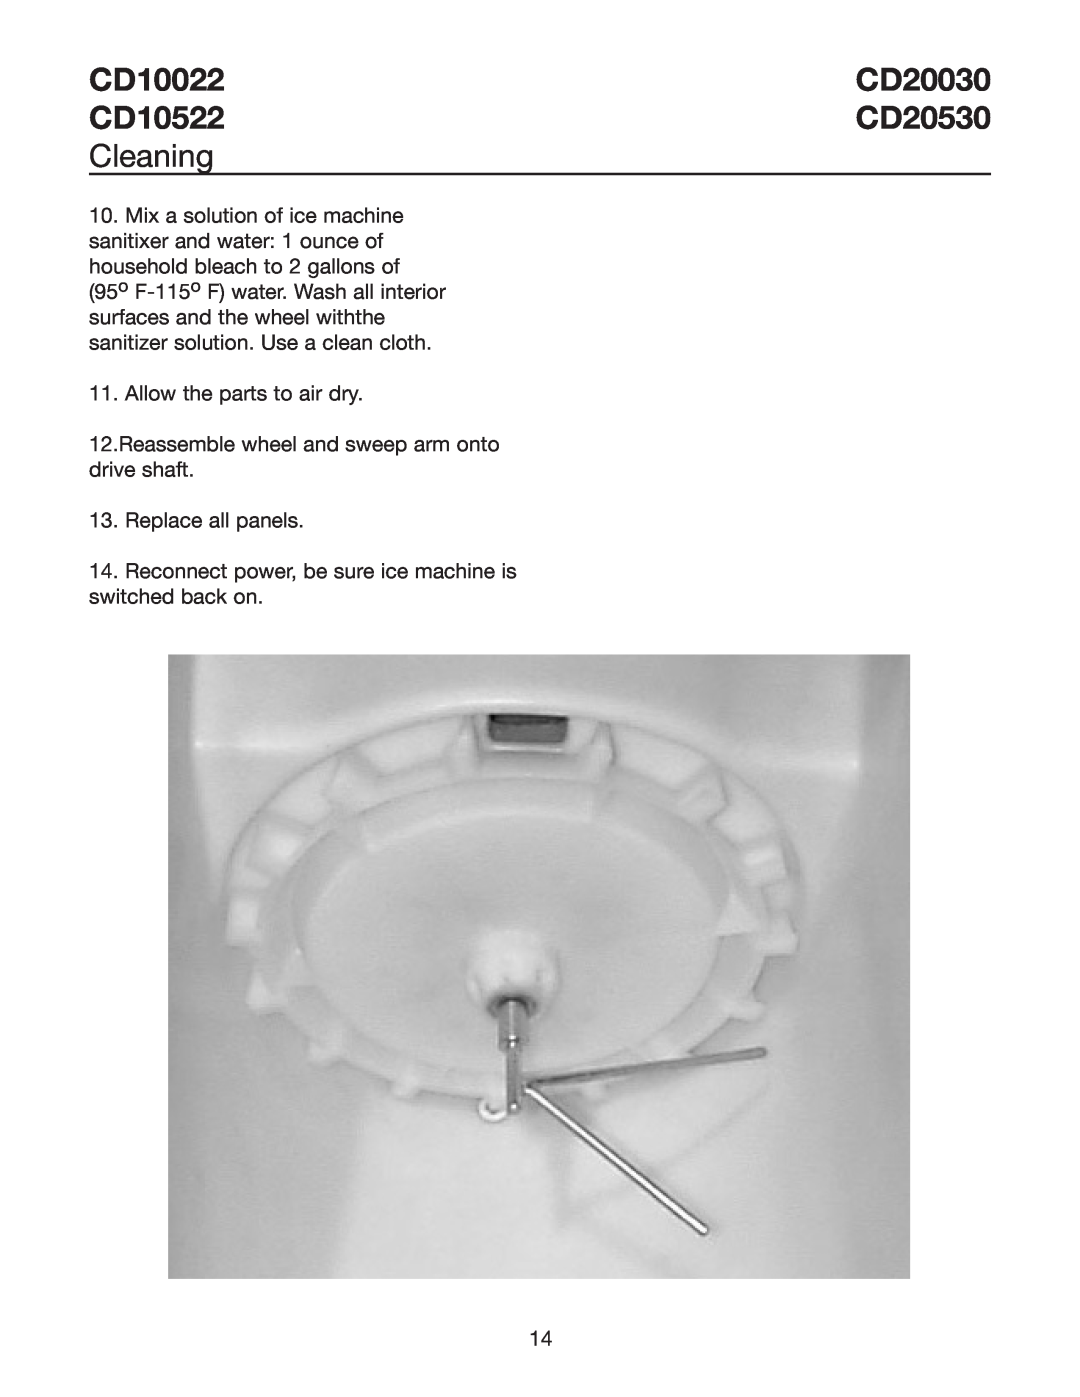 Ice-O-Matic CD20030 CD20530 installation manual CD10022, CD10522, Cleaning 